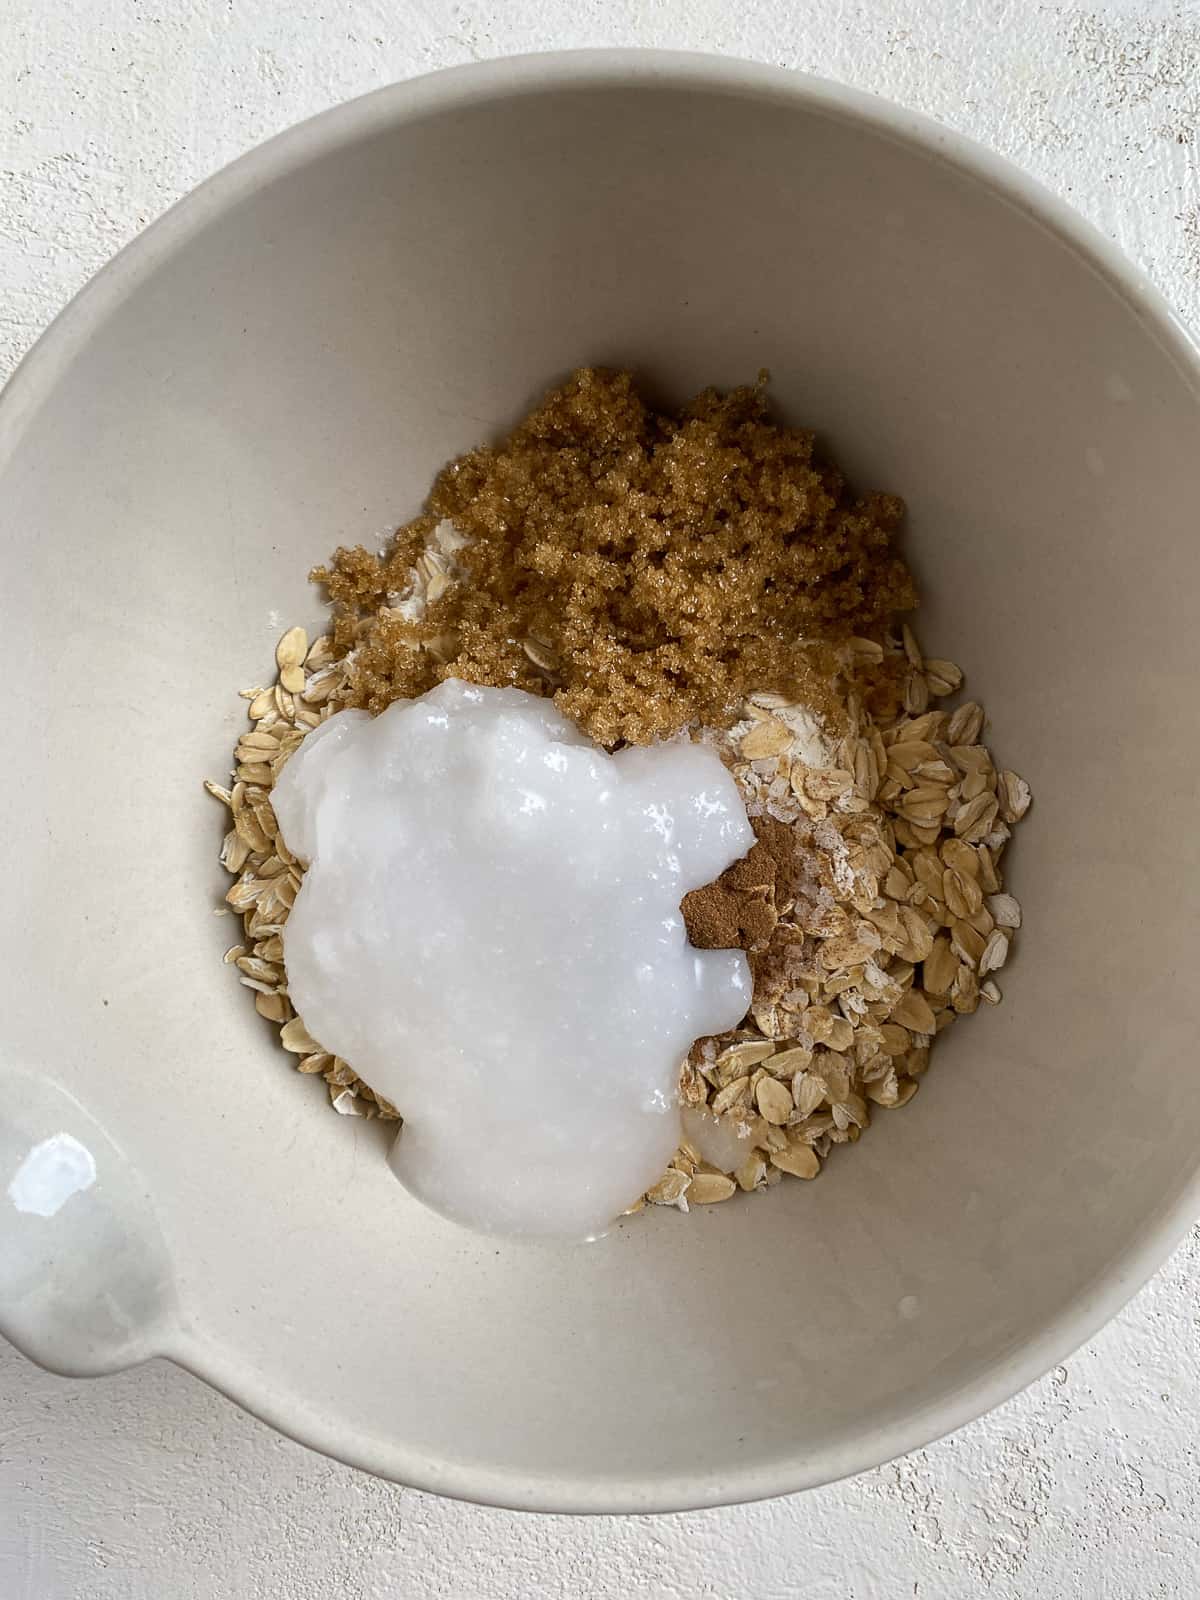 process of adding ingredients for filling in white bowl